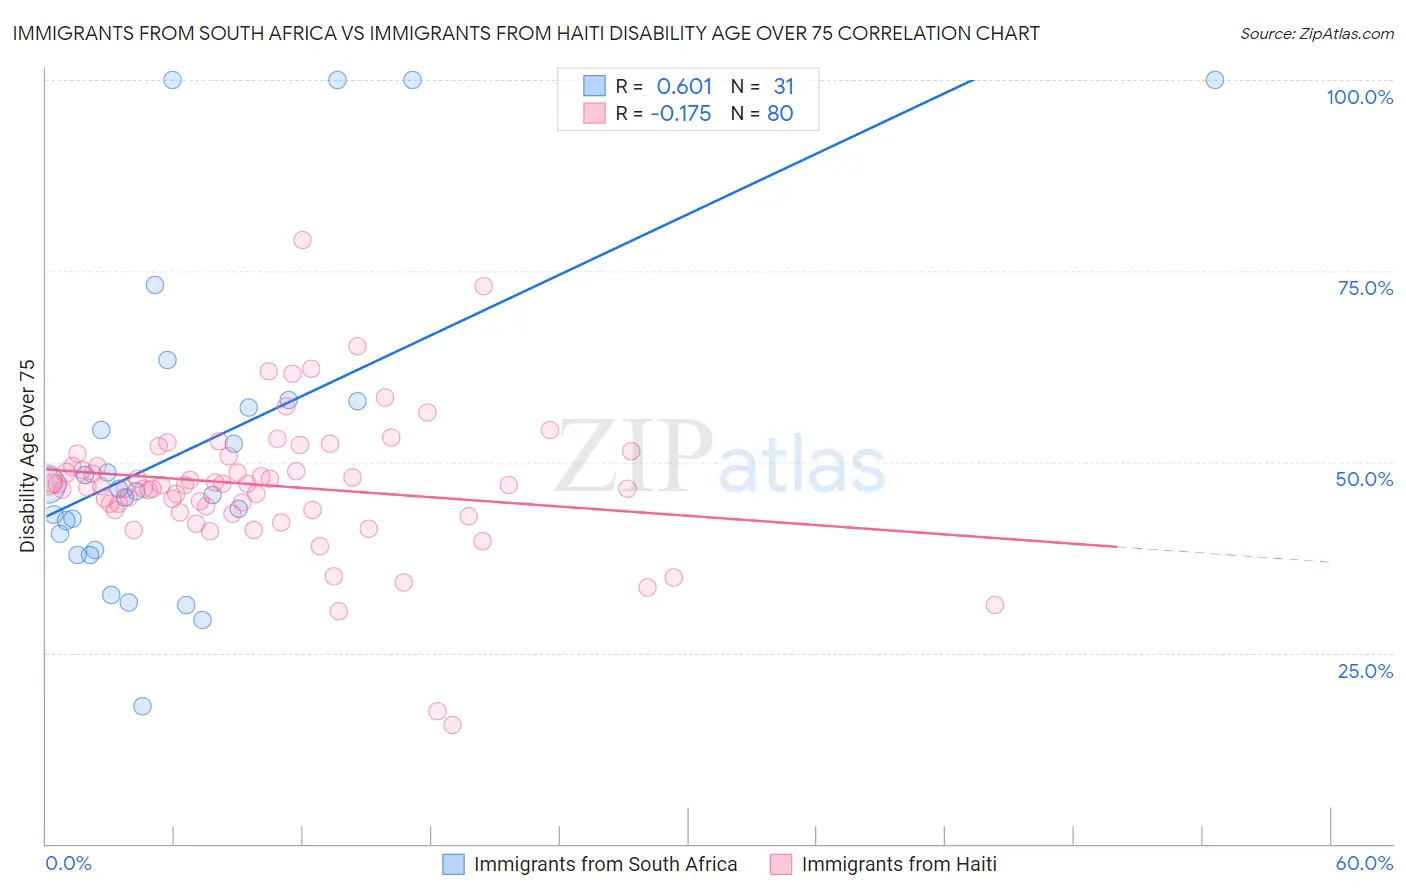 Immigrants from South Africa vs Immigrants from Haiti Disability Age Over 75